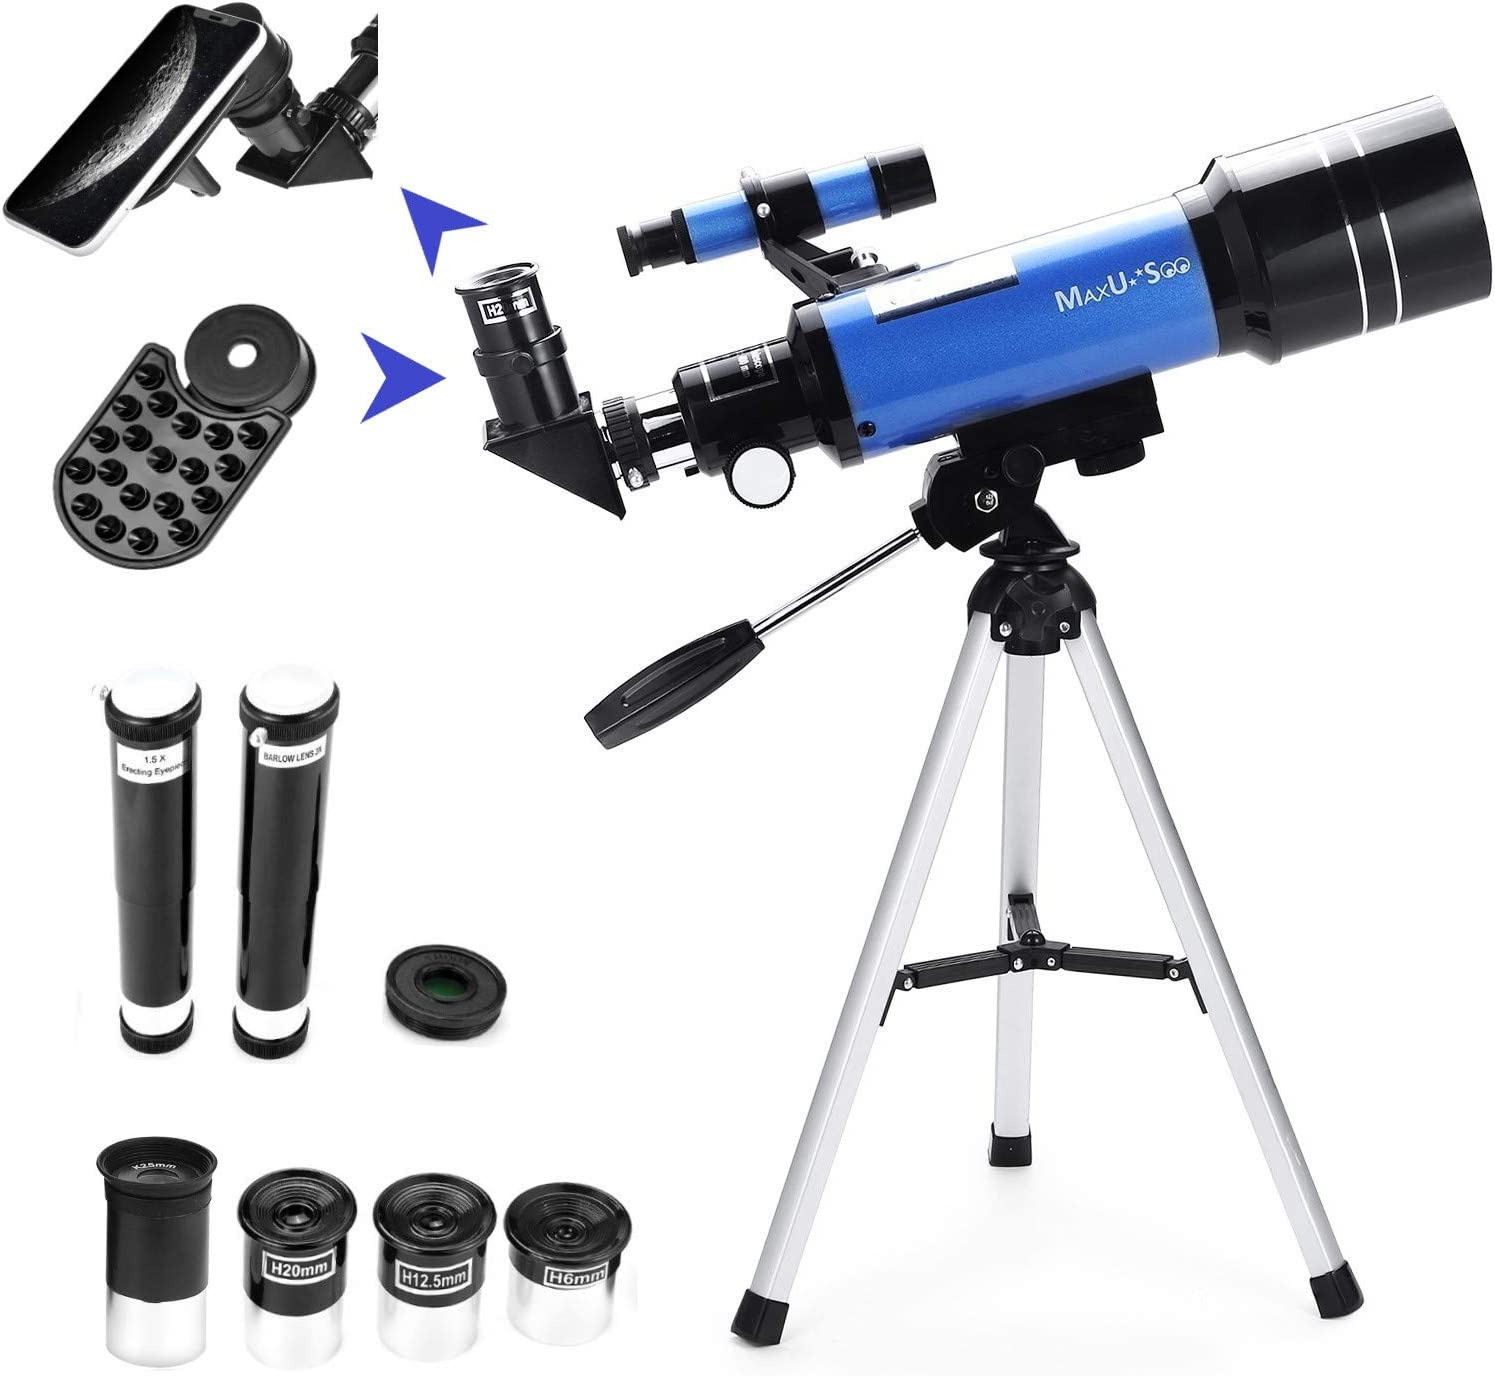 Maxusee 70Mm Telescope for Kids & Astronomy Beginners, Refractor Telescope with 